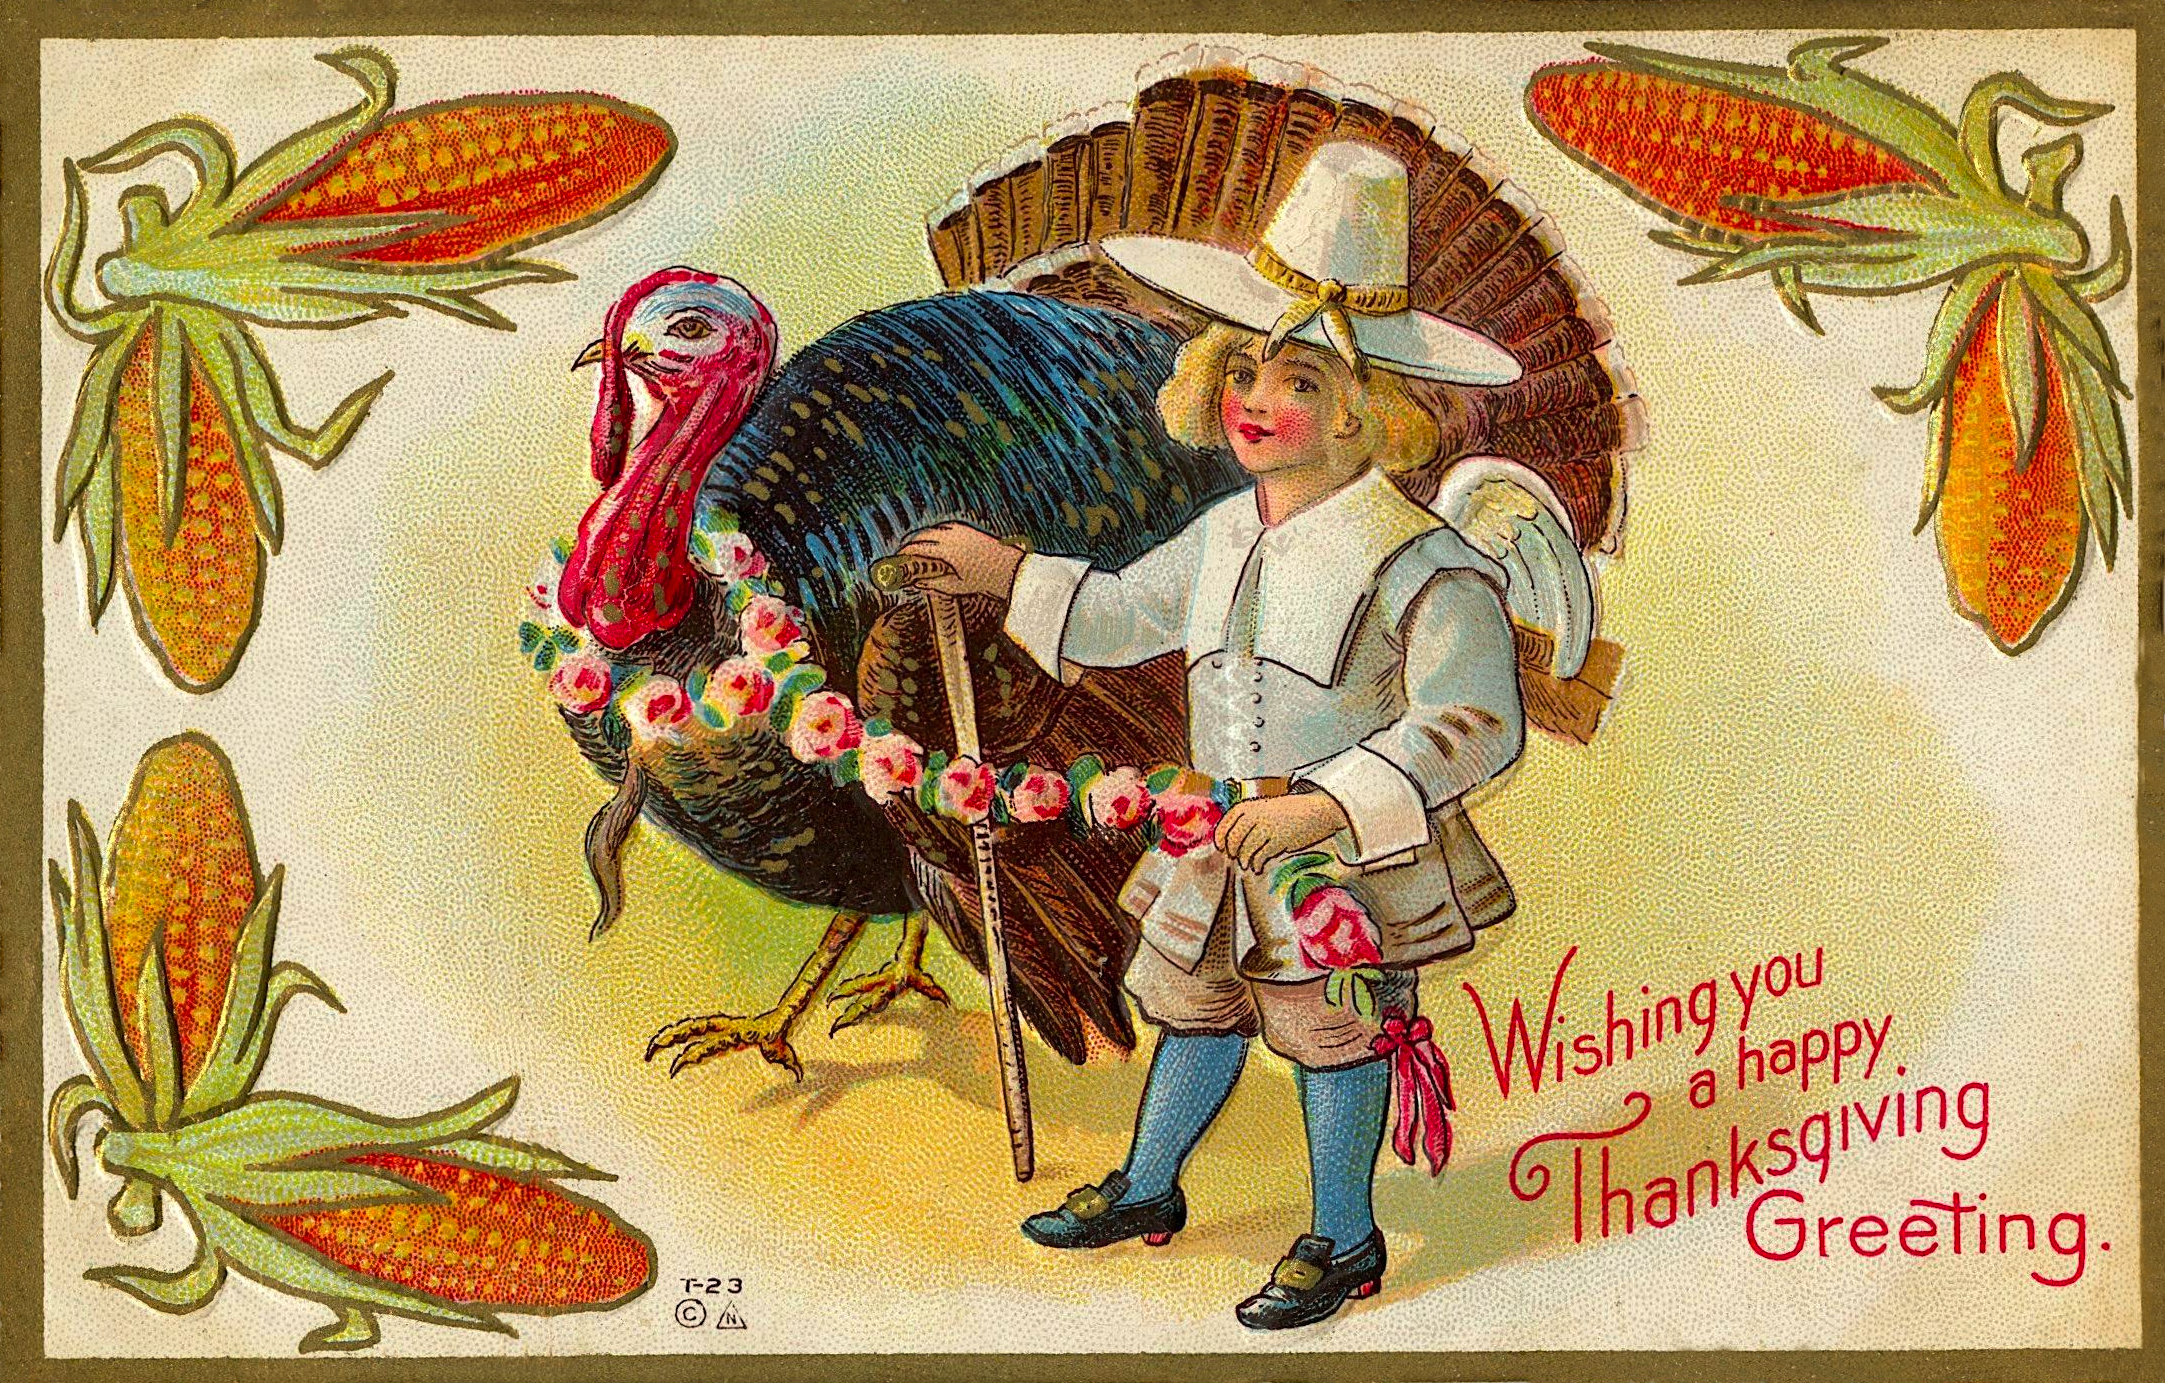 A little Pilgrim and his pet turket, Thanksgiving wishes.